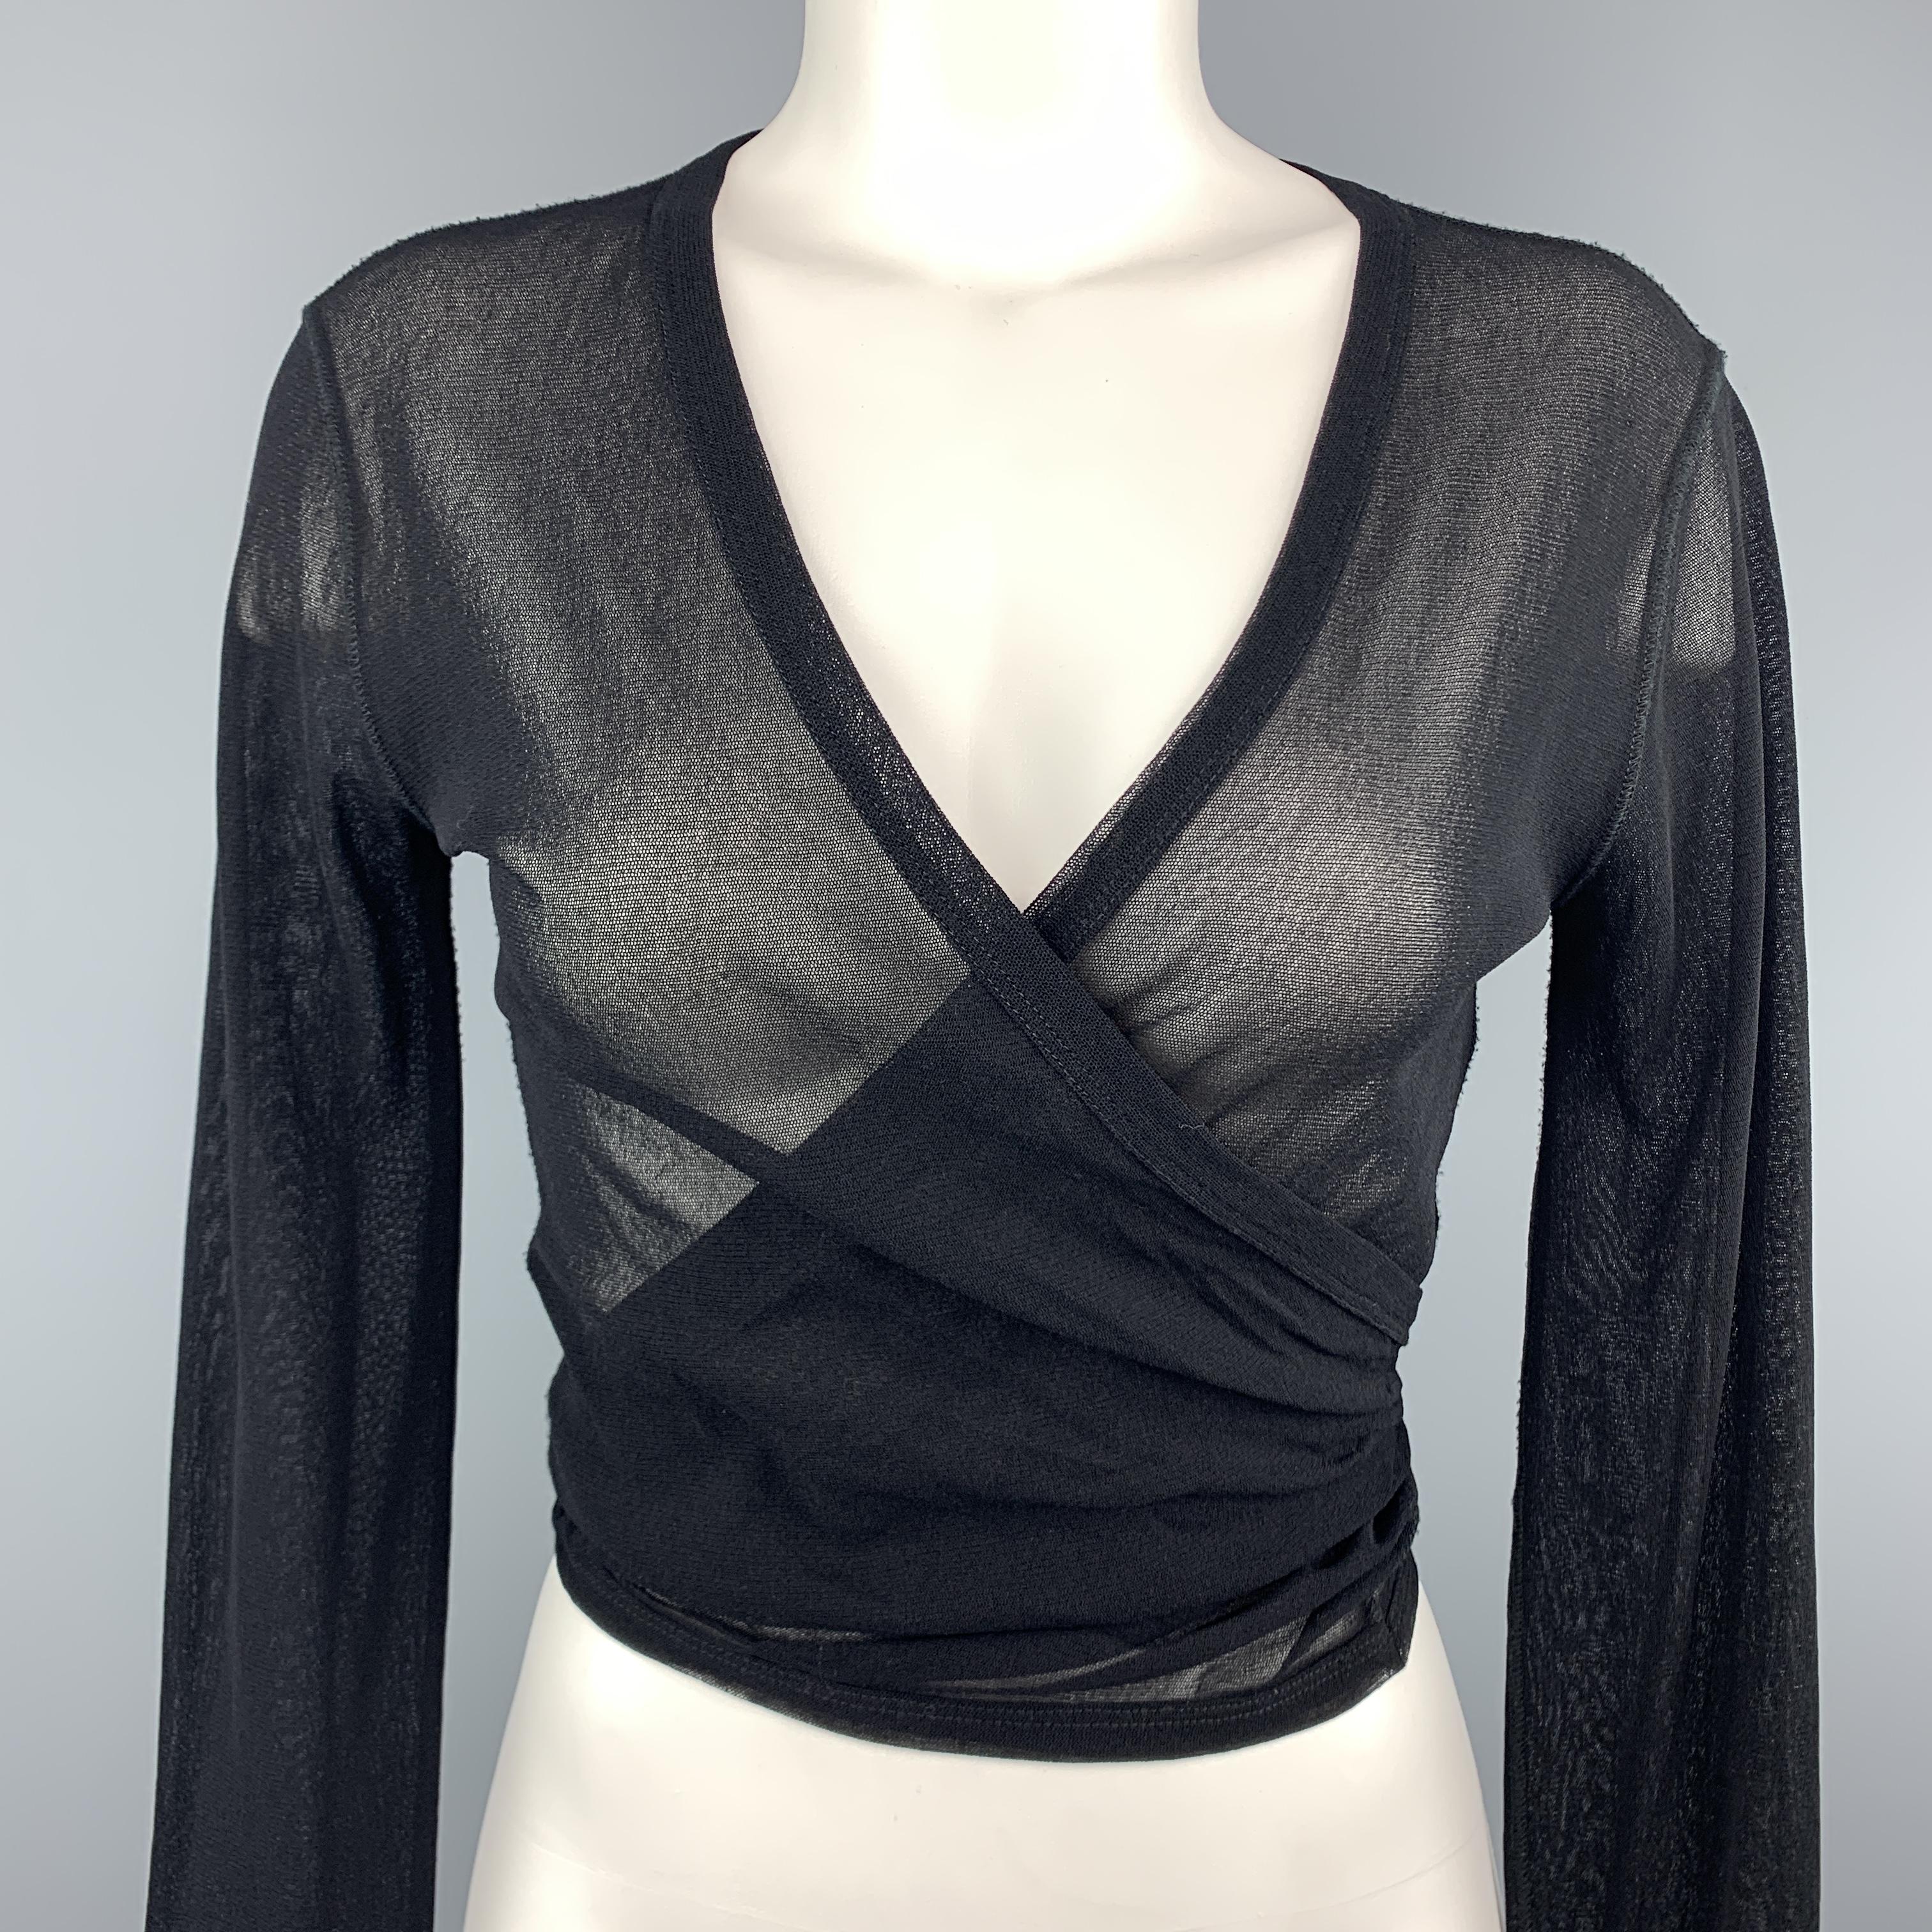 JEAN PAUL GAULTIER cardigan top comes in black stretch micro mesh ling long sleeves, wrapped V neck that ties, and signature back tab. Made in Italy.
 
Excellent Pre-Owned Condition.
Marked: XL
 
Measurements:
 
Shoulder: 15 in.
Bust: 40 in.
Sleeve: